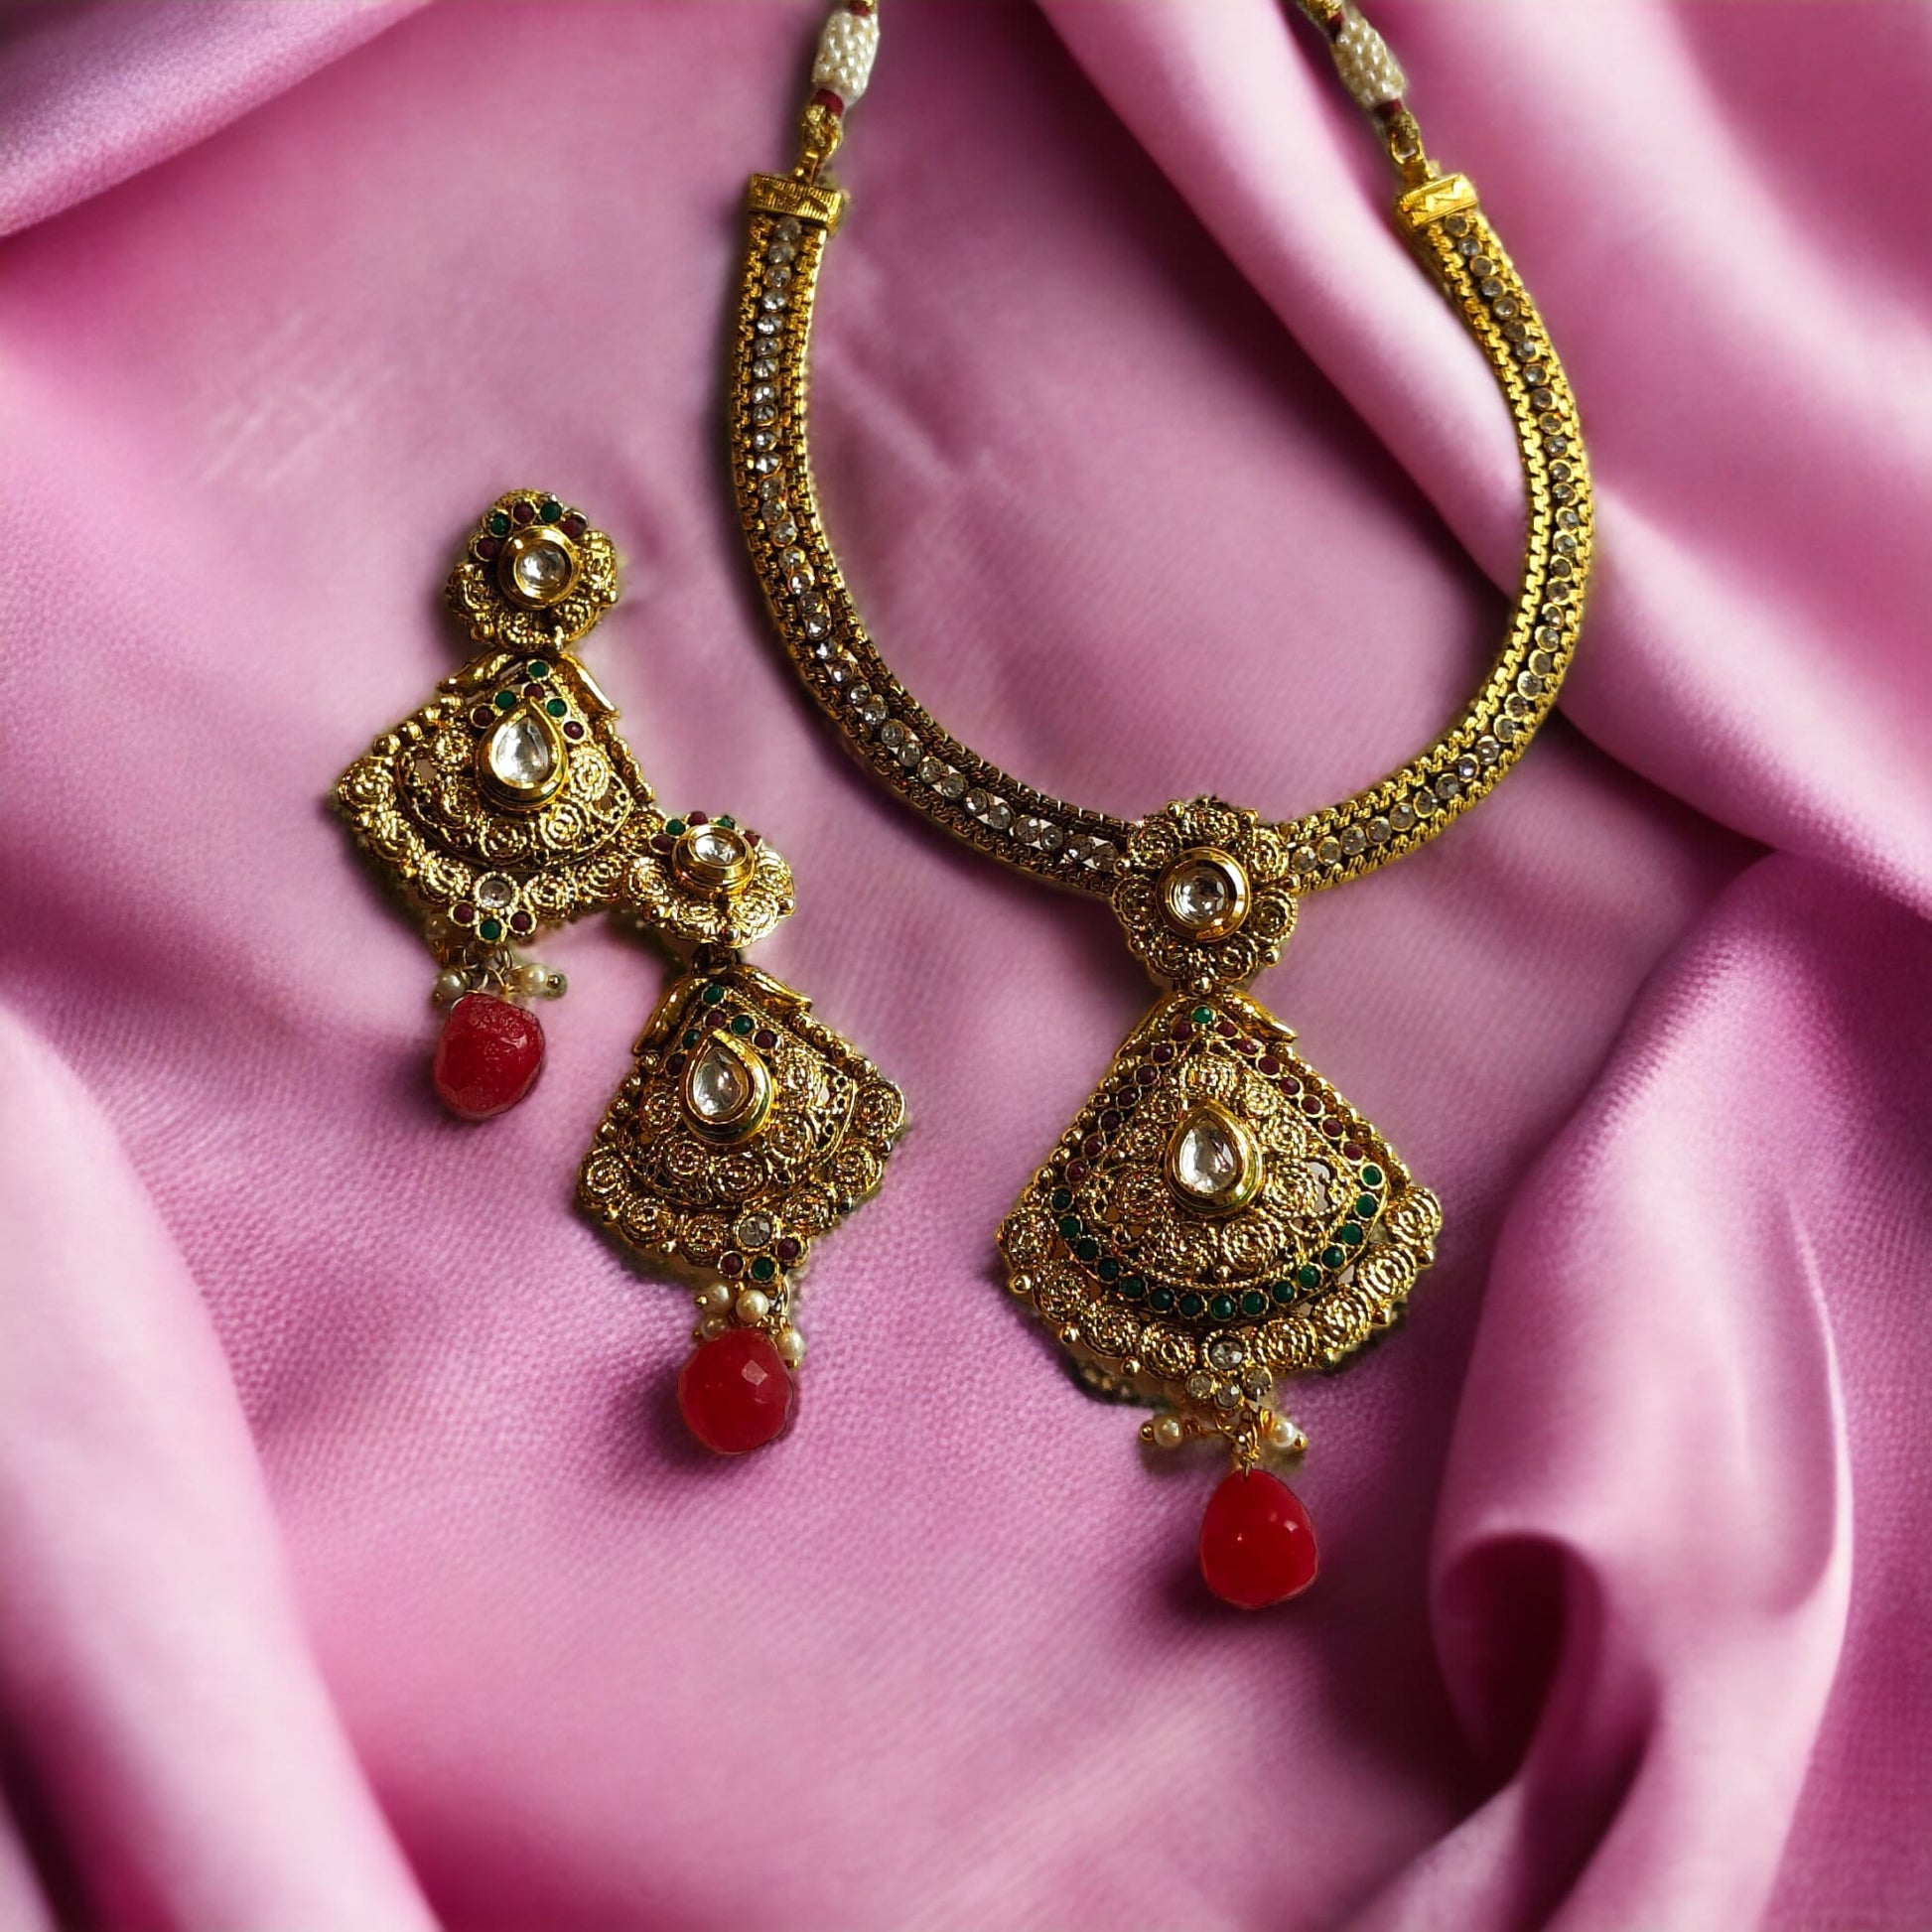 Gold Plated Traditional Indian Asian Wedding Pendant Necklace and Earring Set